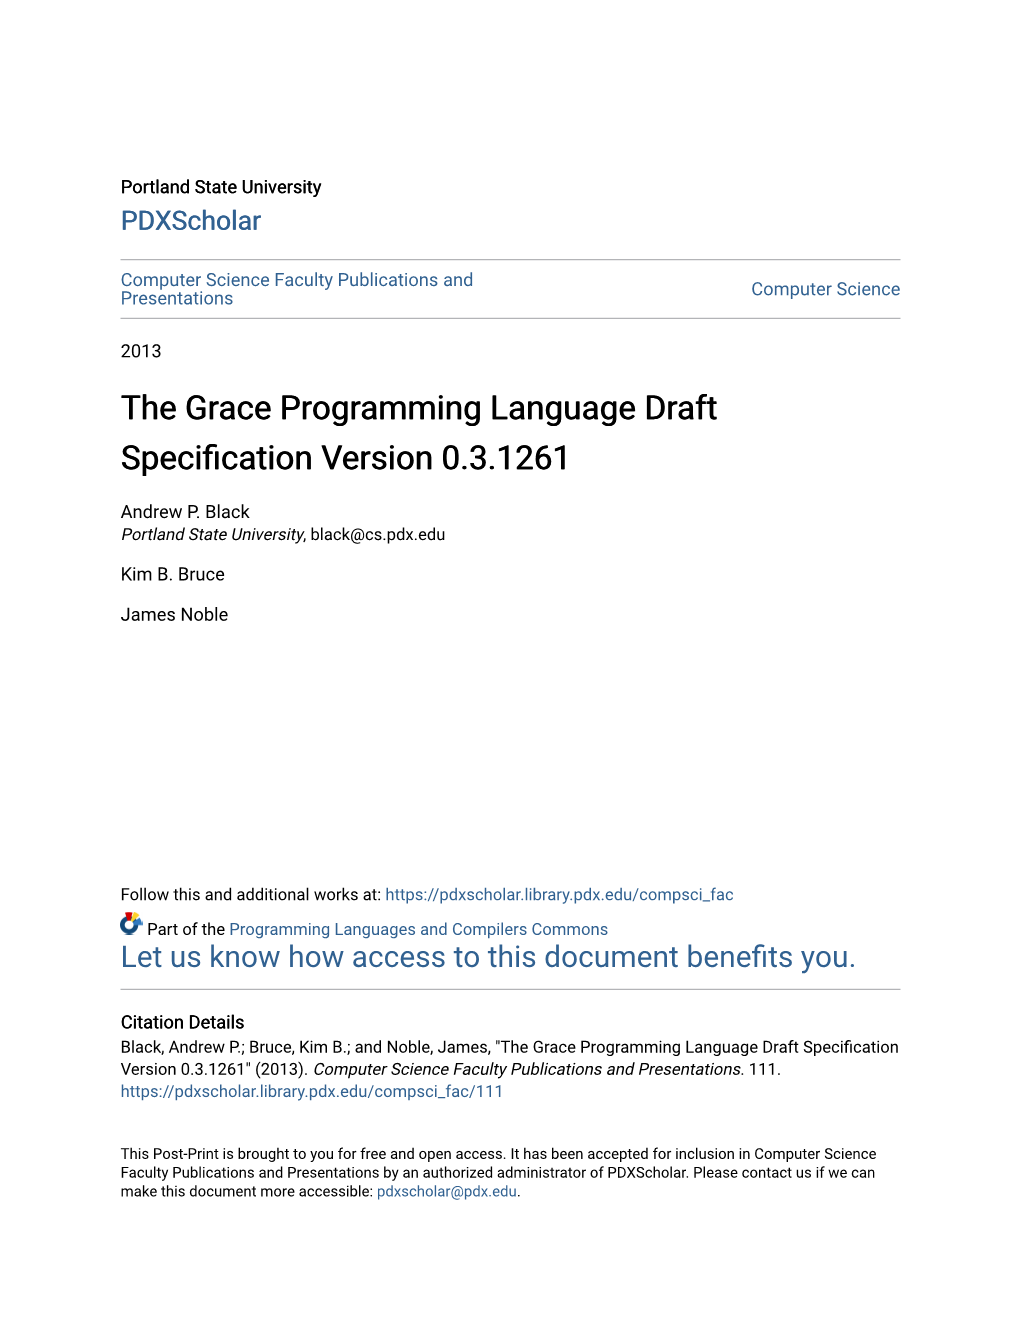 The Grace Programming Language Draft Specification Version 0.3.1261" (2013)